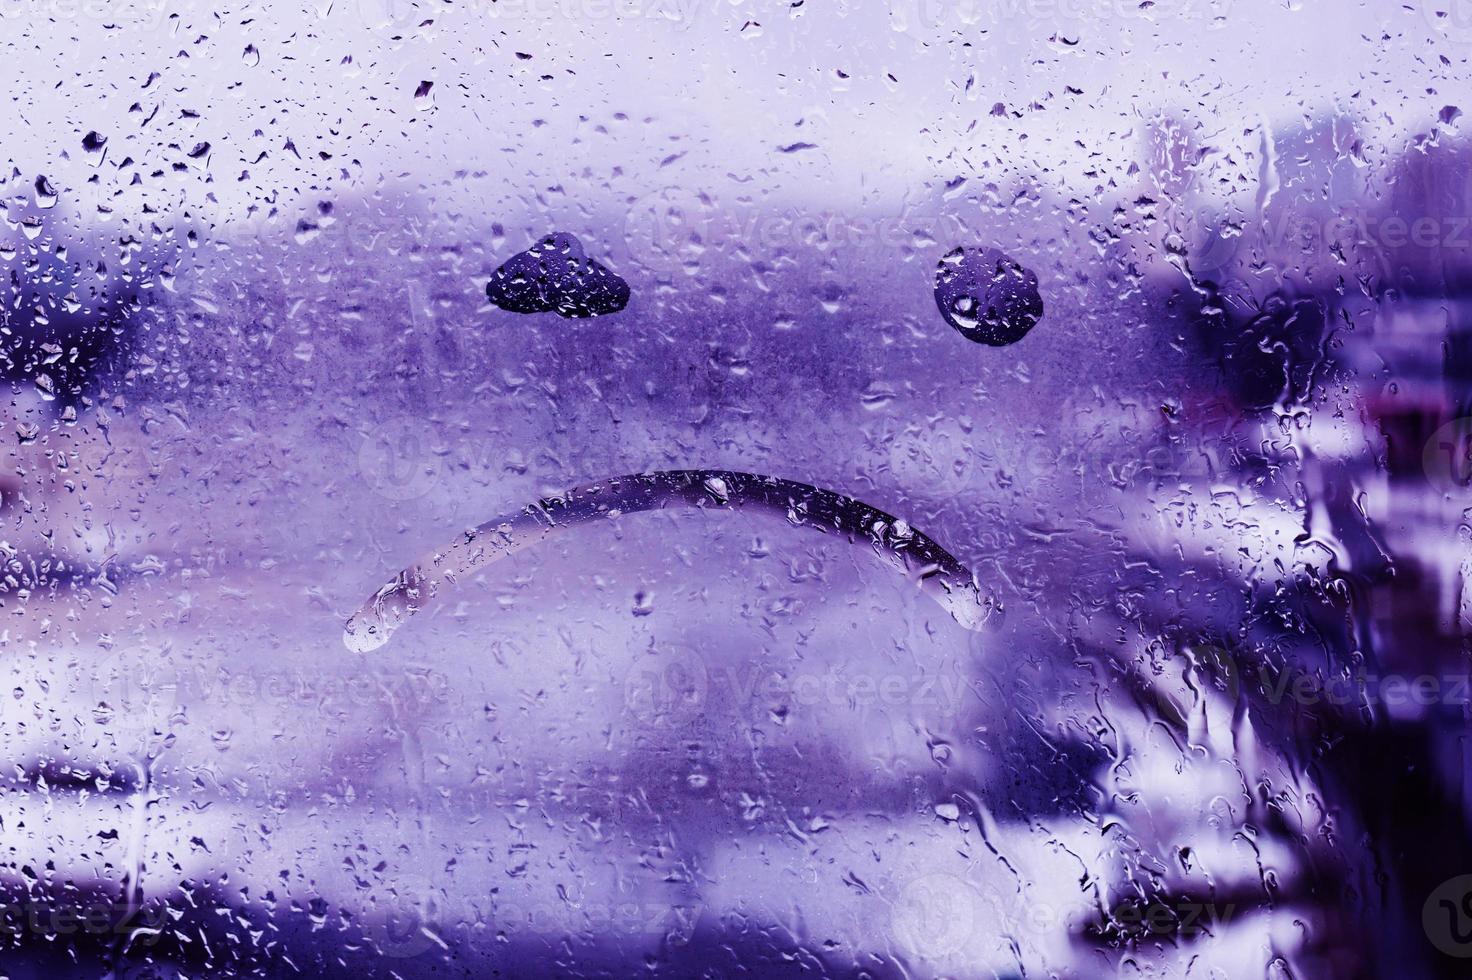 unhappy face drawn on glass photo